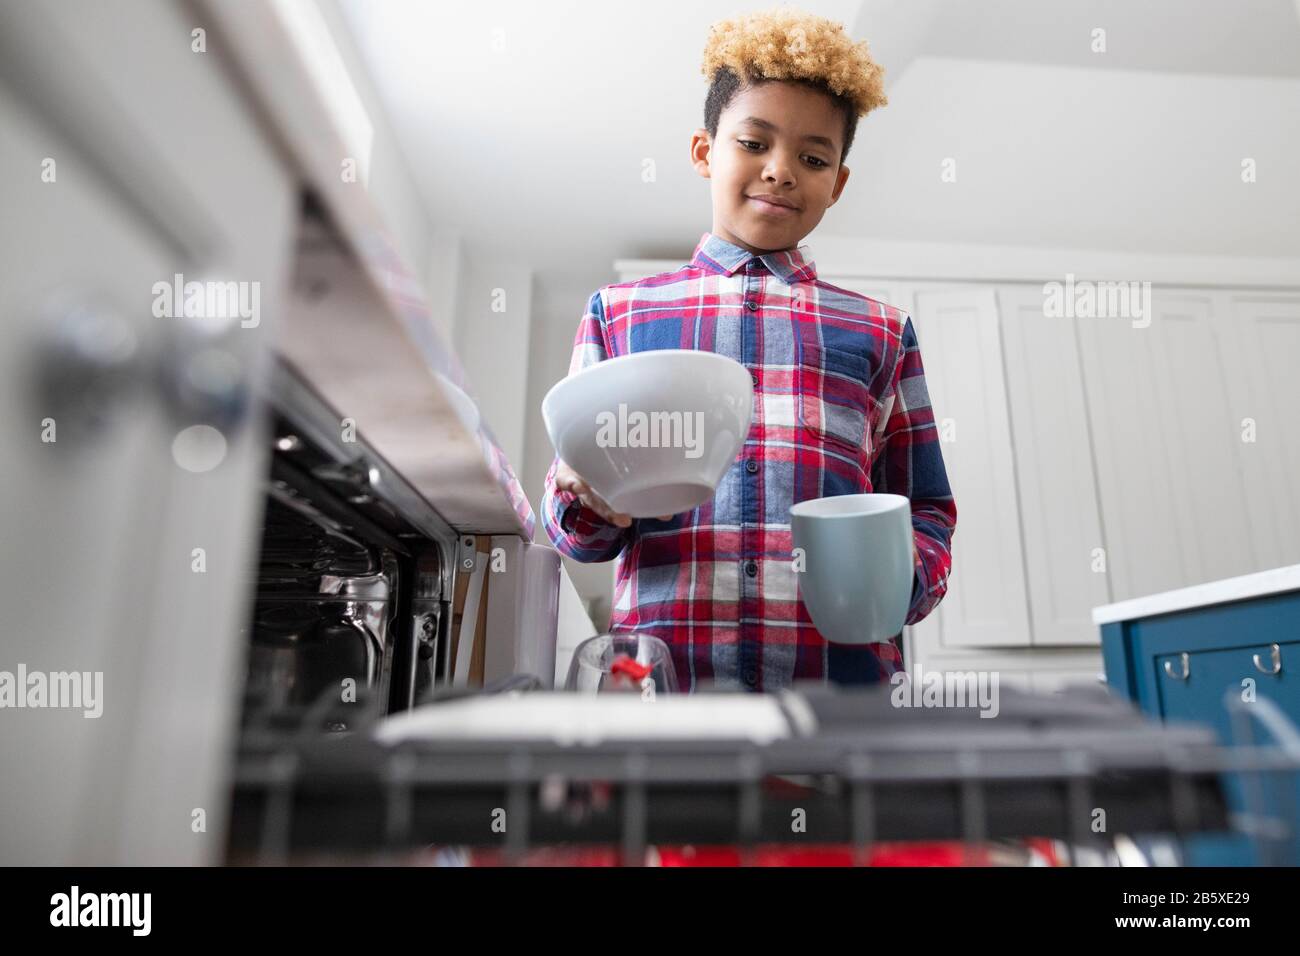 Boy Helping With Chores At Home By Stacking Crockery In Dishwasher Stock Photo